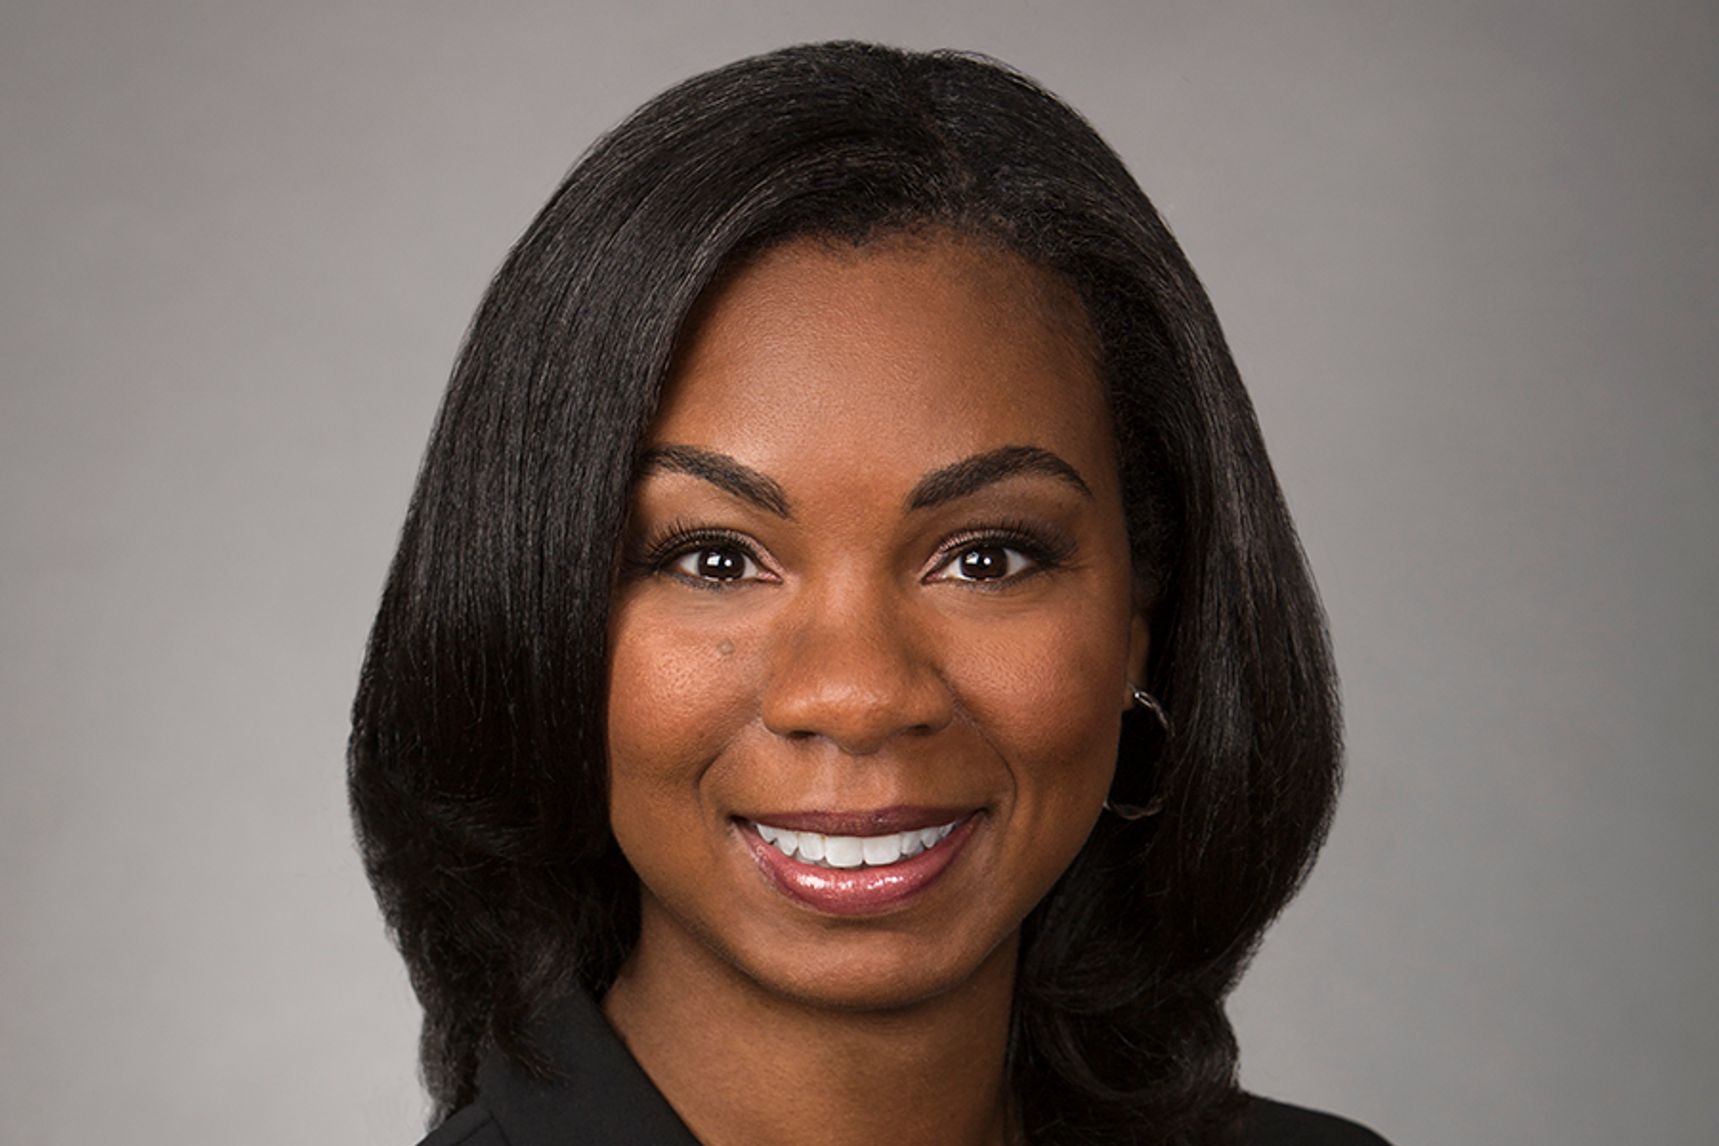 Public Company Accounting Oversight Board Chair Erica Williams